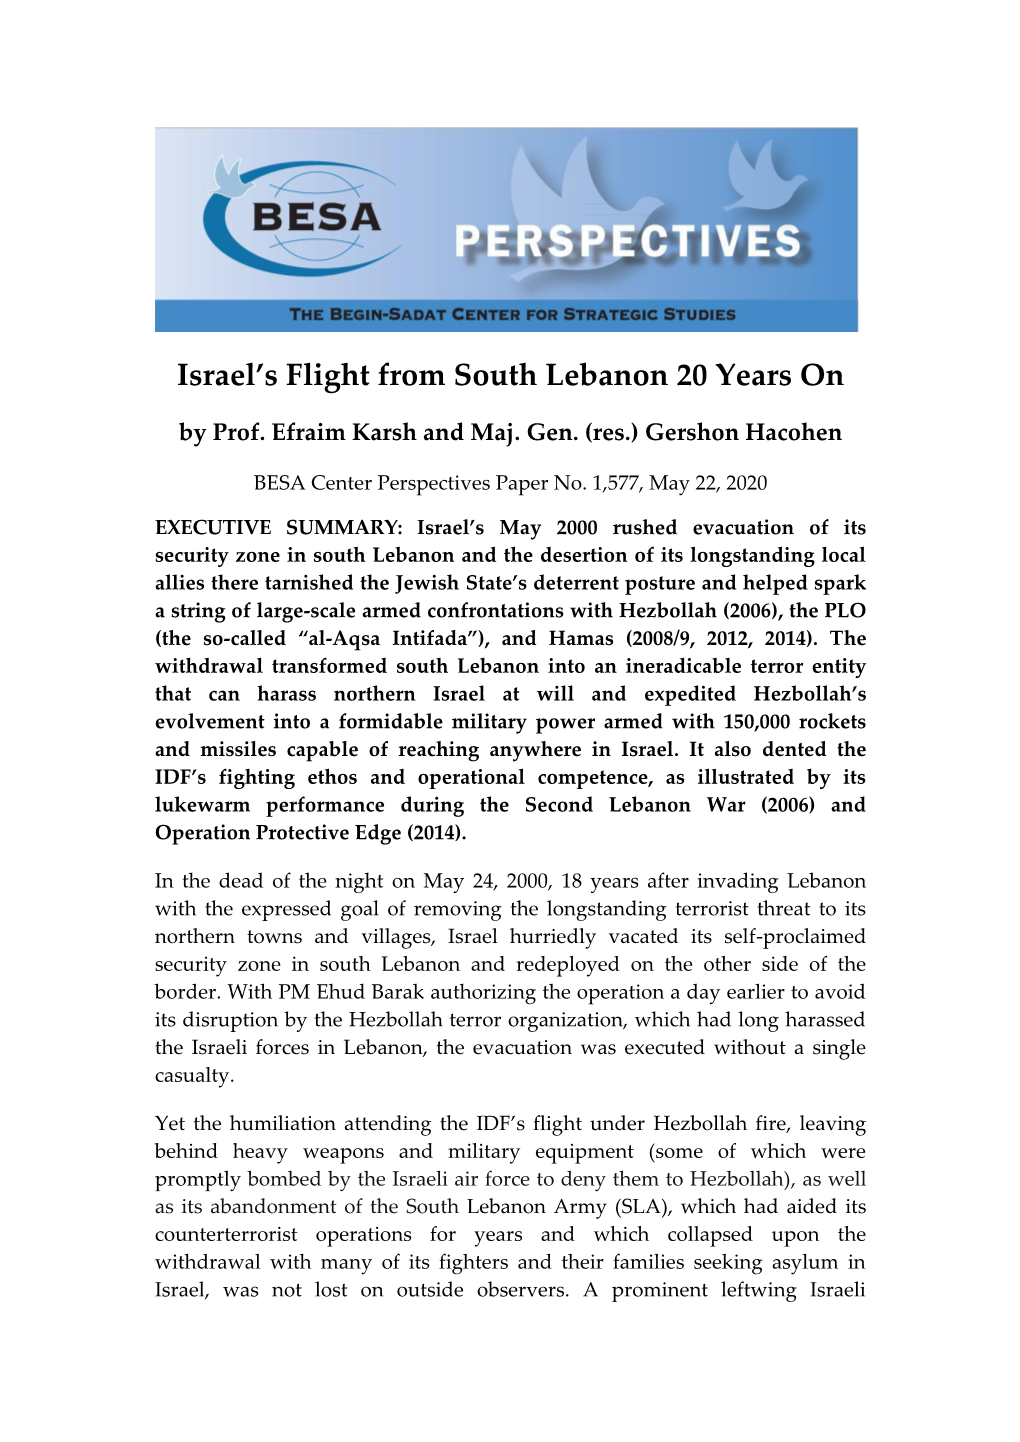 Israel's Flight from South Lebanon 20 Years On